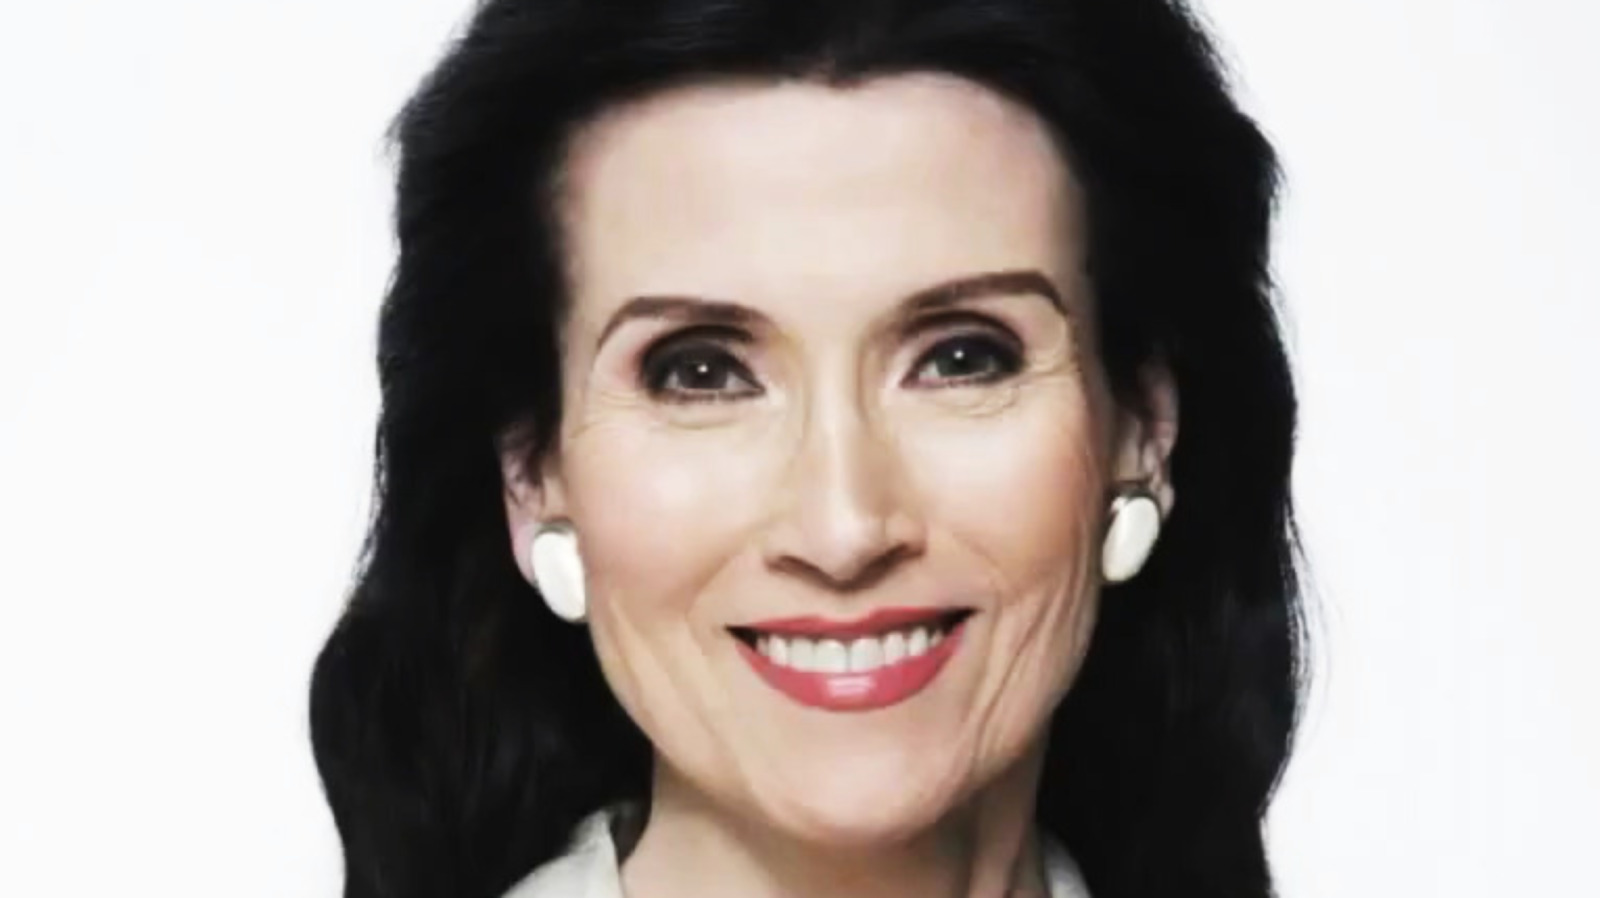 Marilyn vos Savant, who reportedly possesses the world's highest